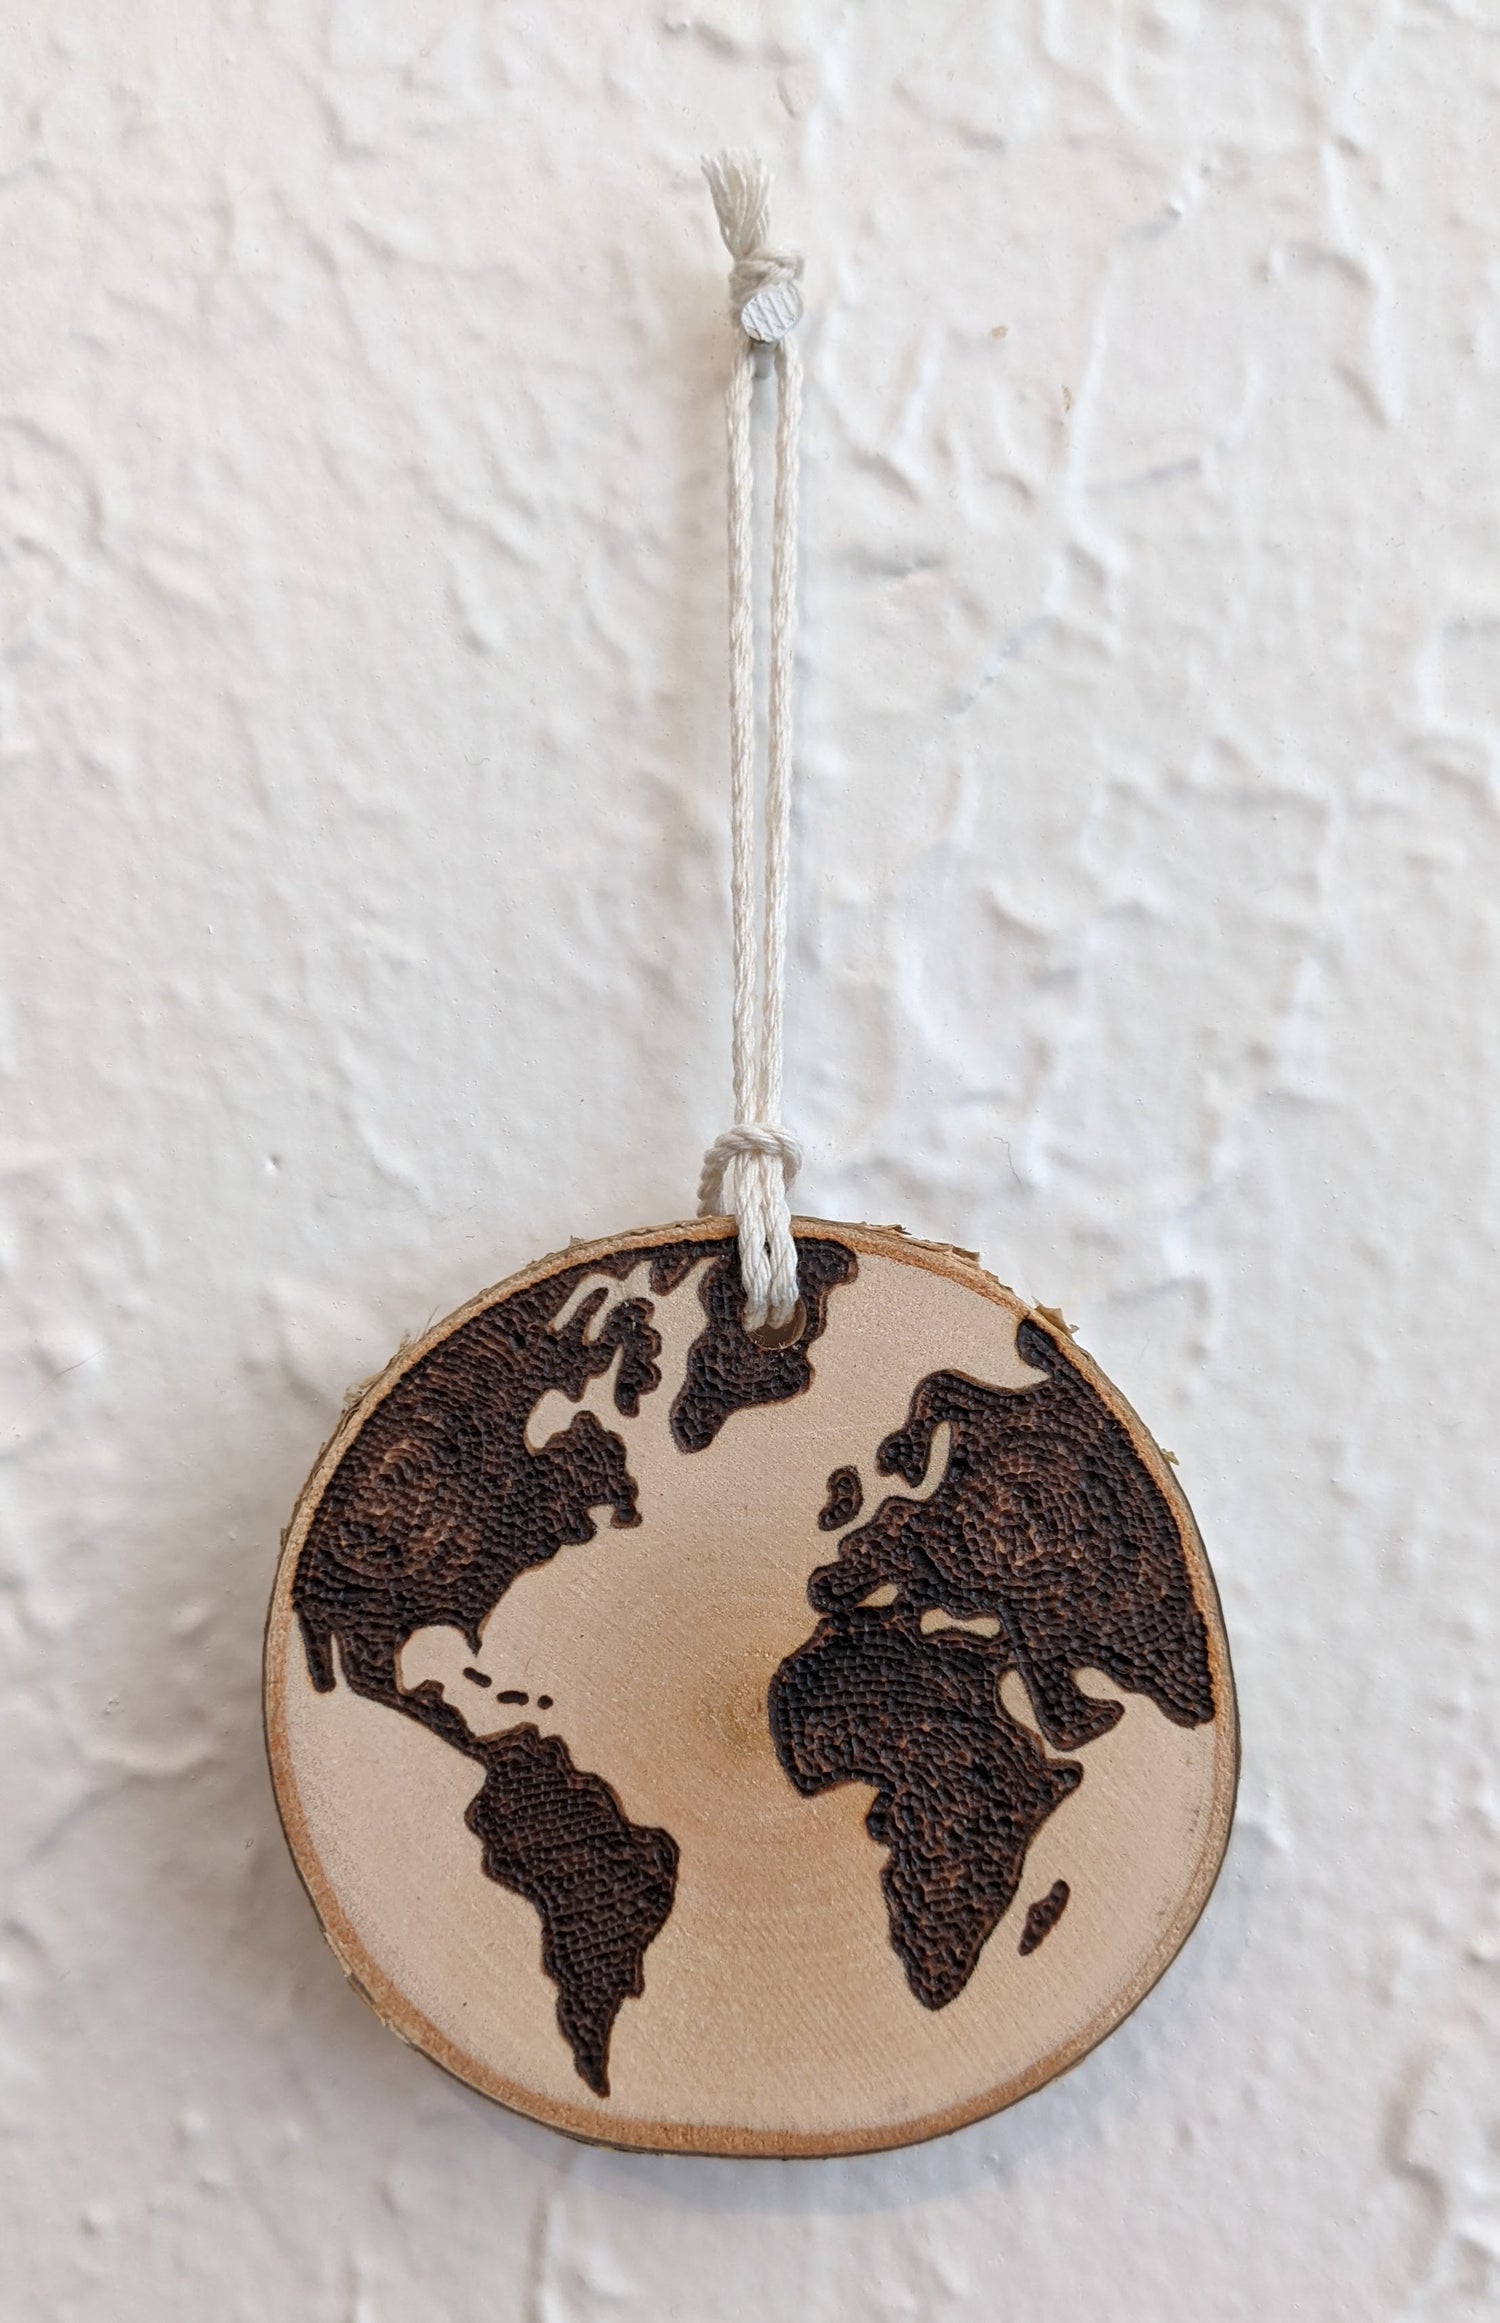 Wood burned Art by Wood Wanderlust ornament with world design